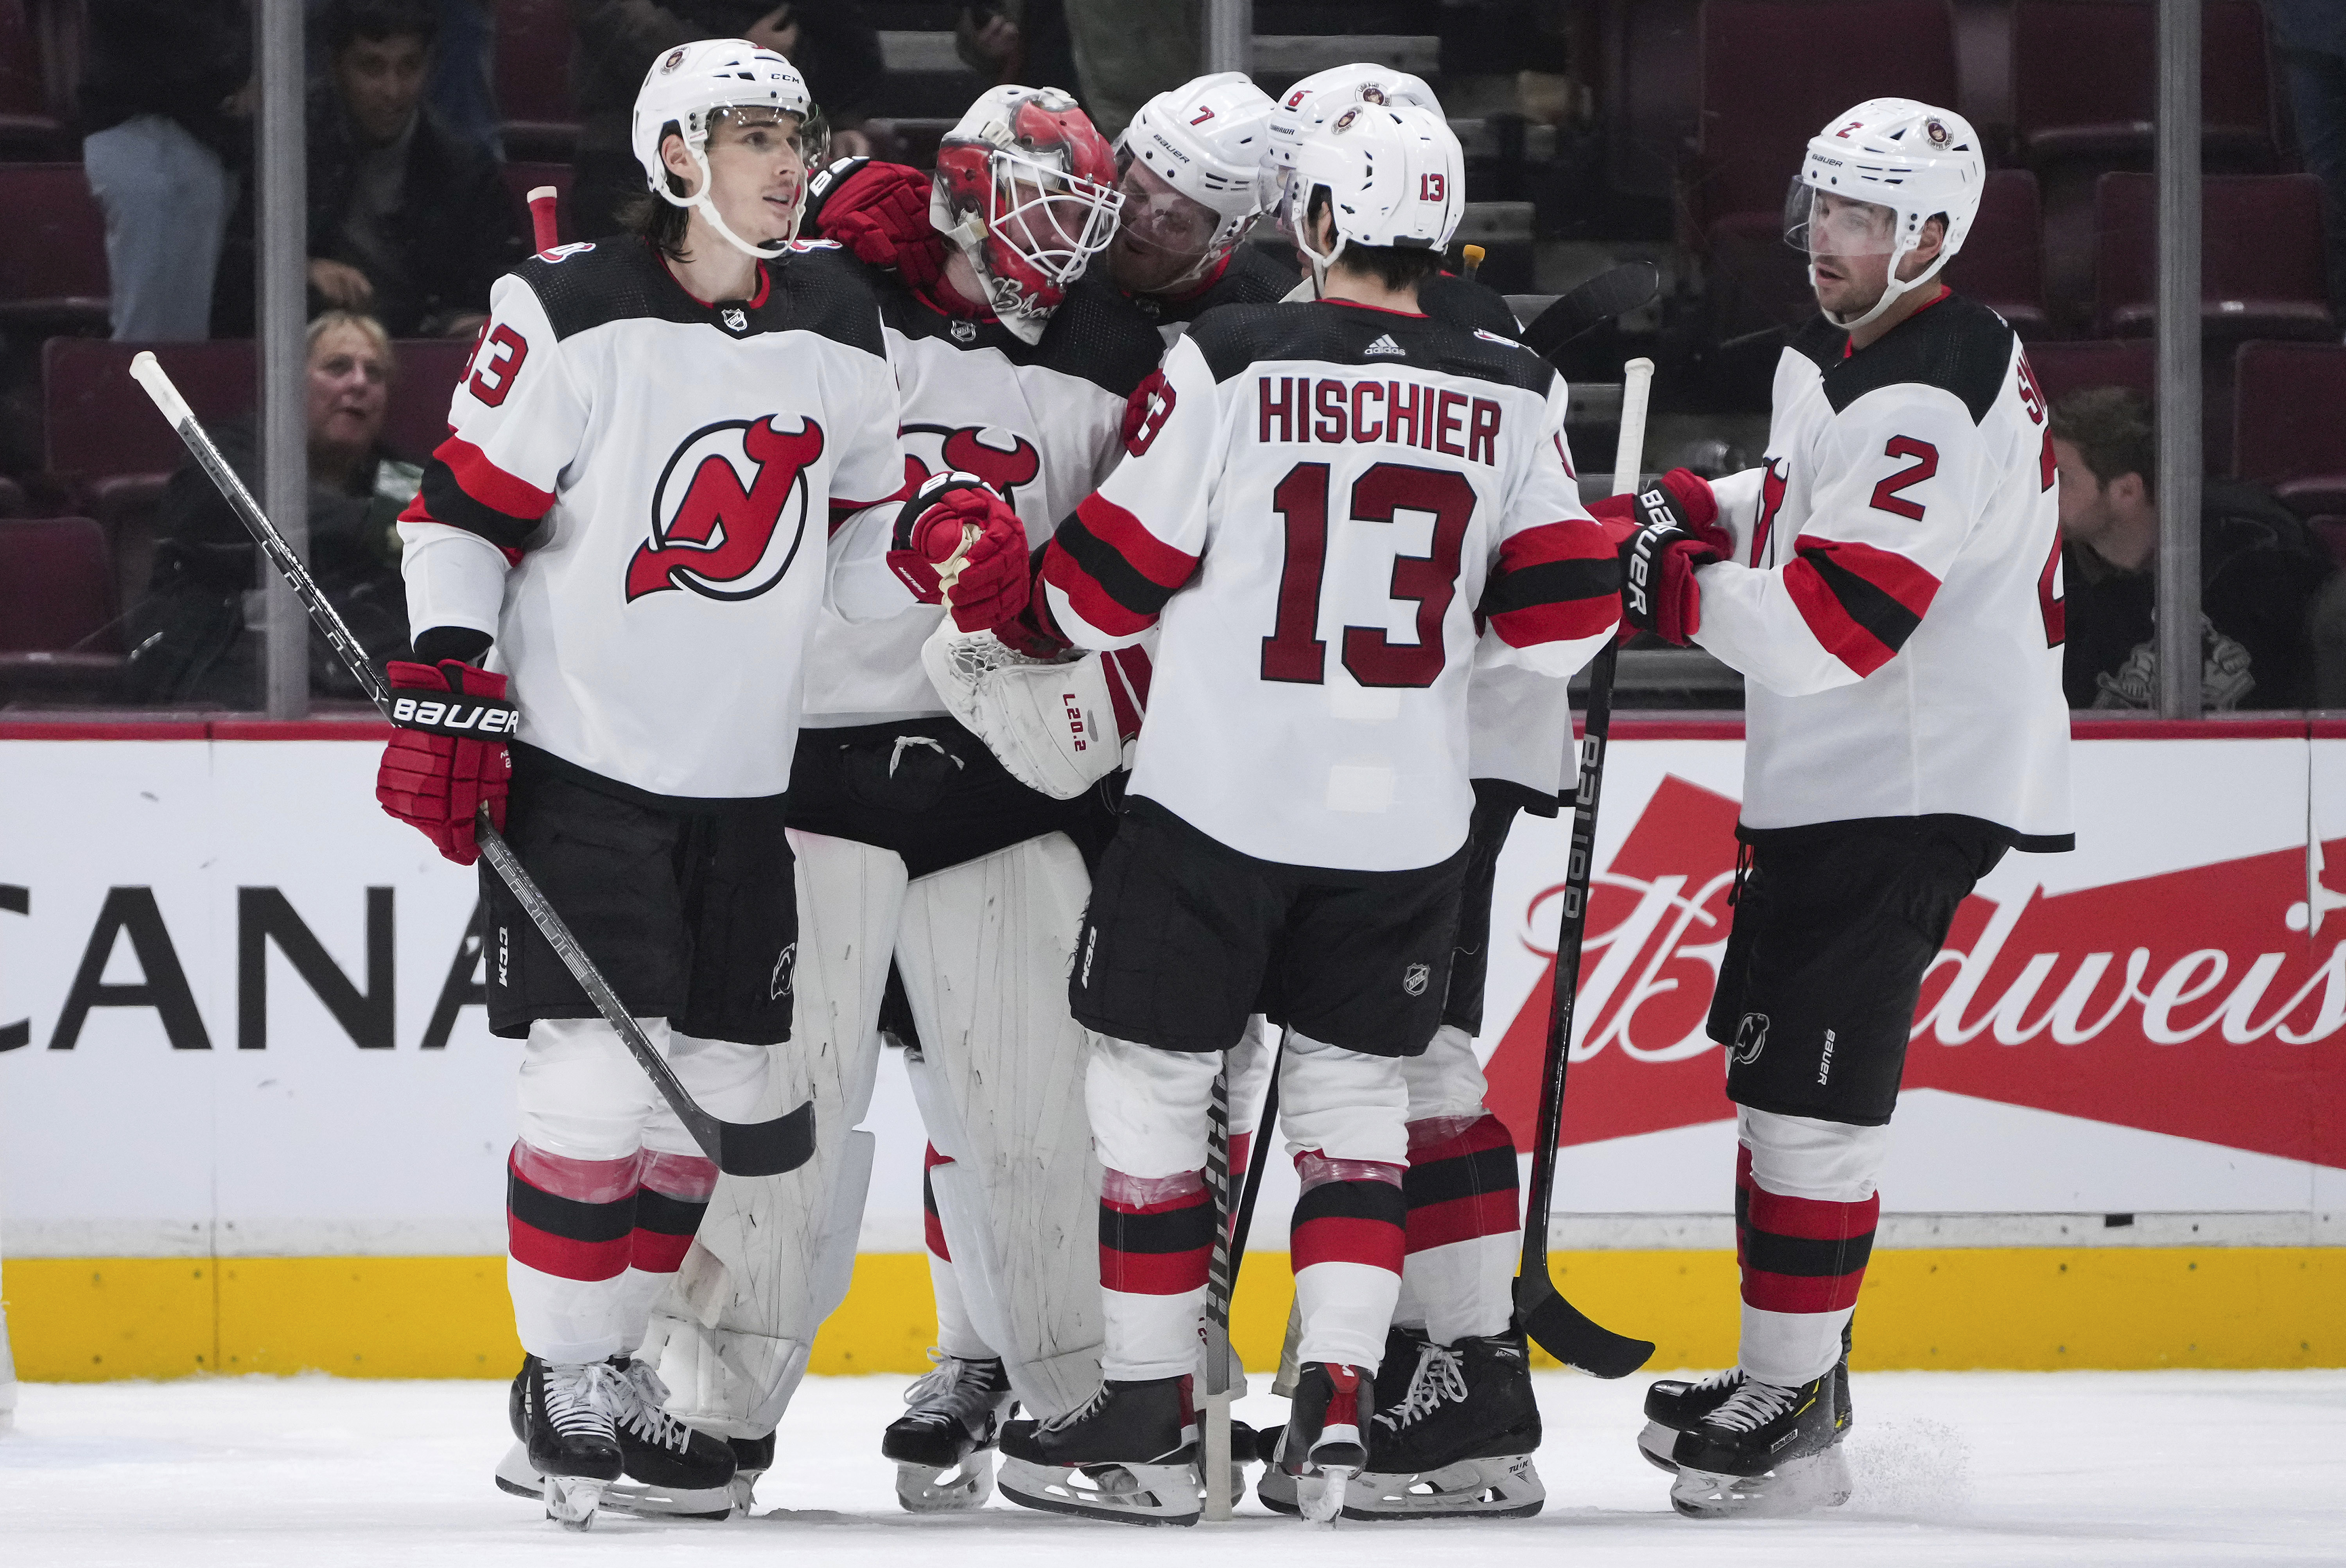 The New Jersey Devils team skates out on the ice after the winning